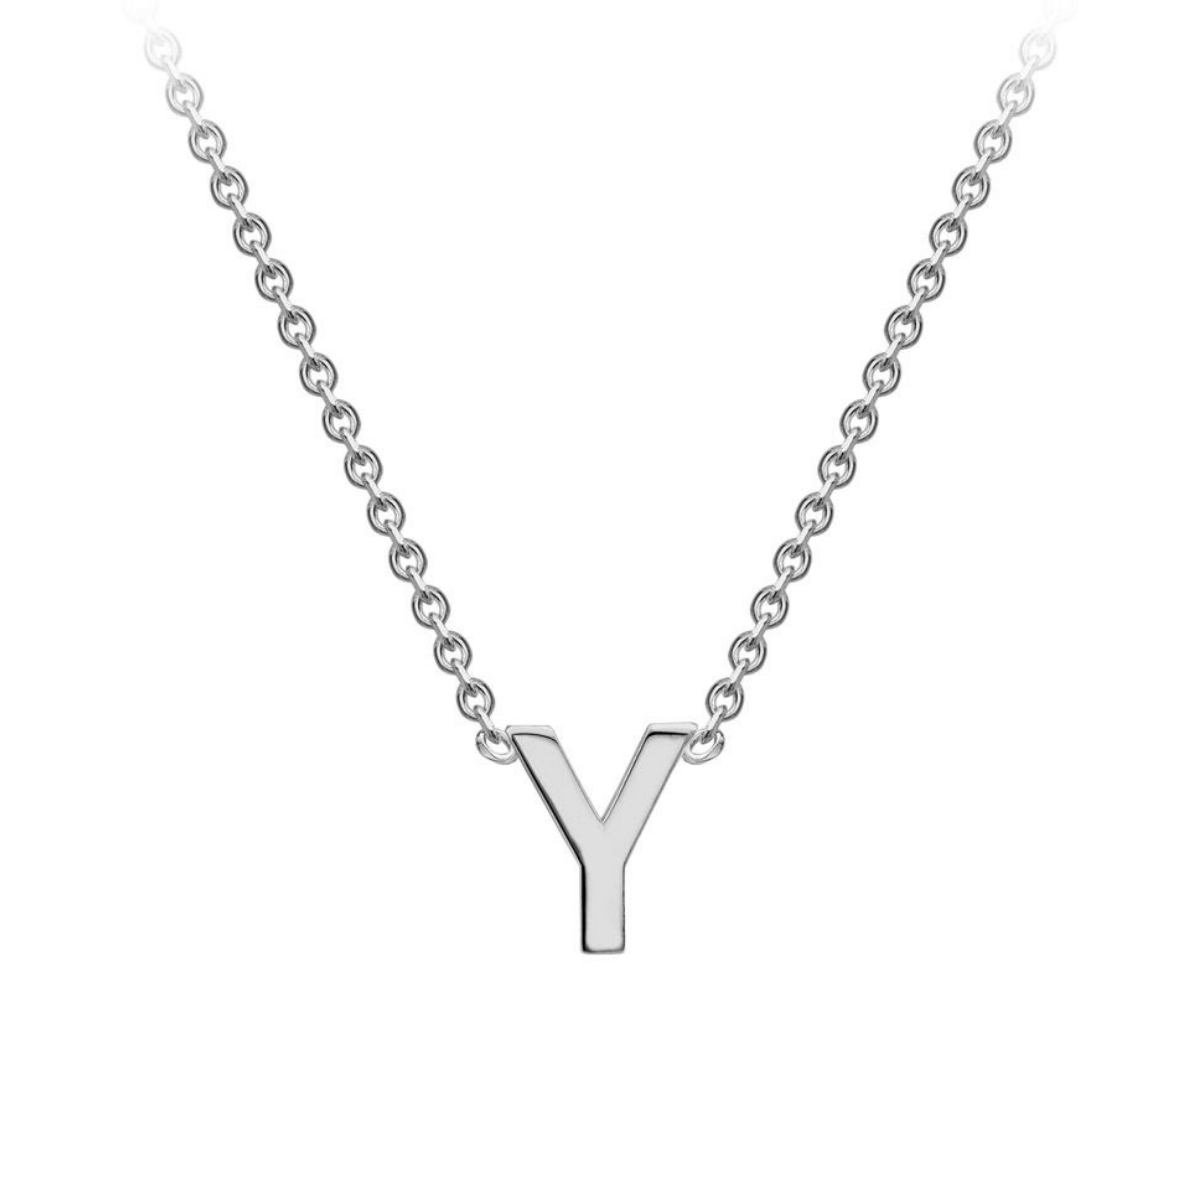 PETITE 'Y' INITIAL NECKLACE | 9K SOLID WHITE GOLD